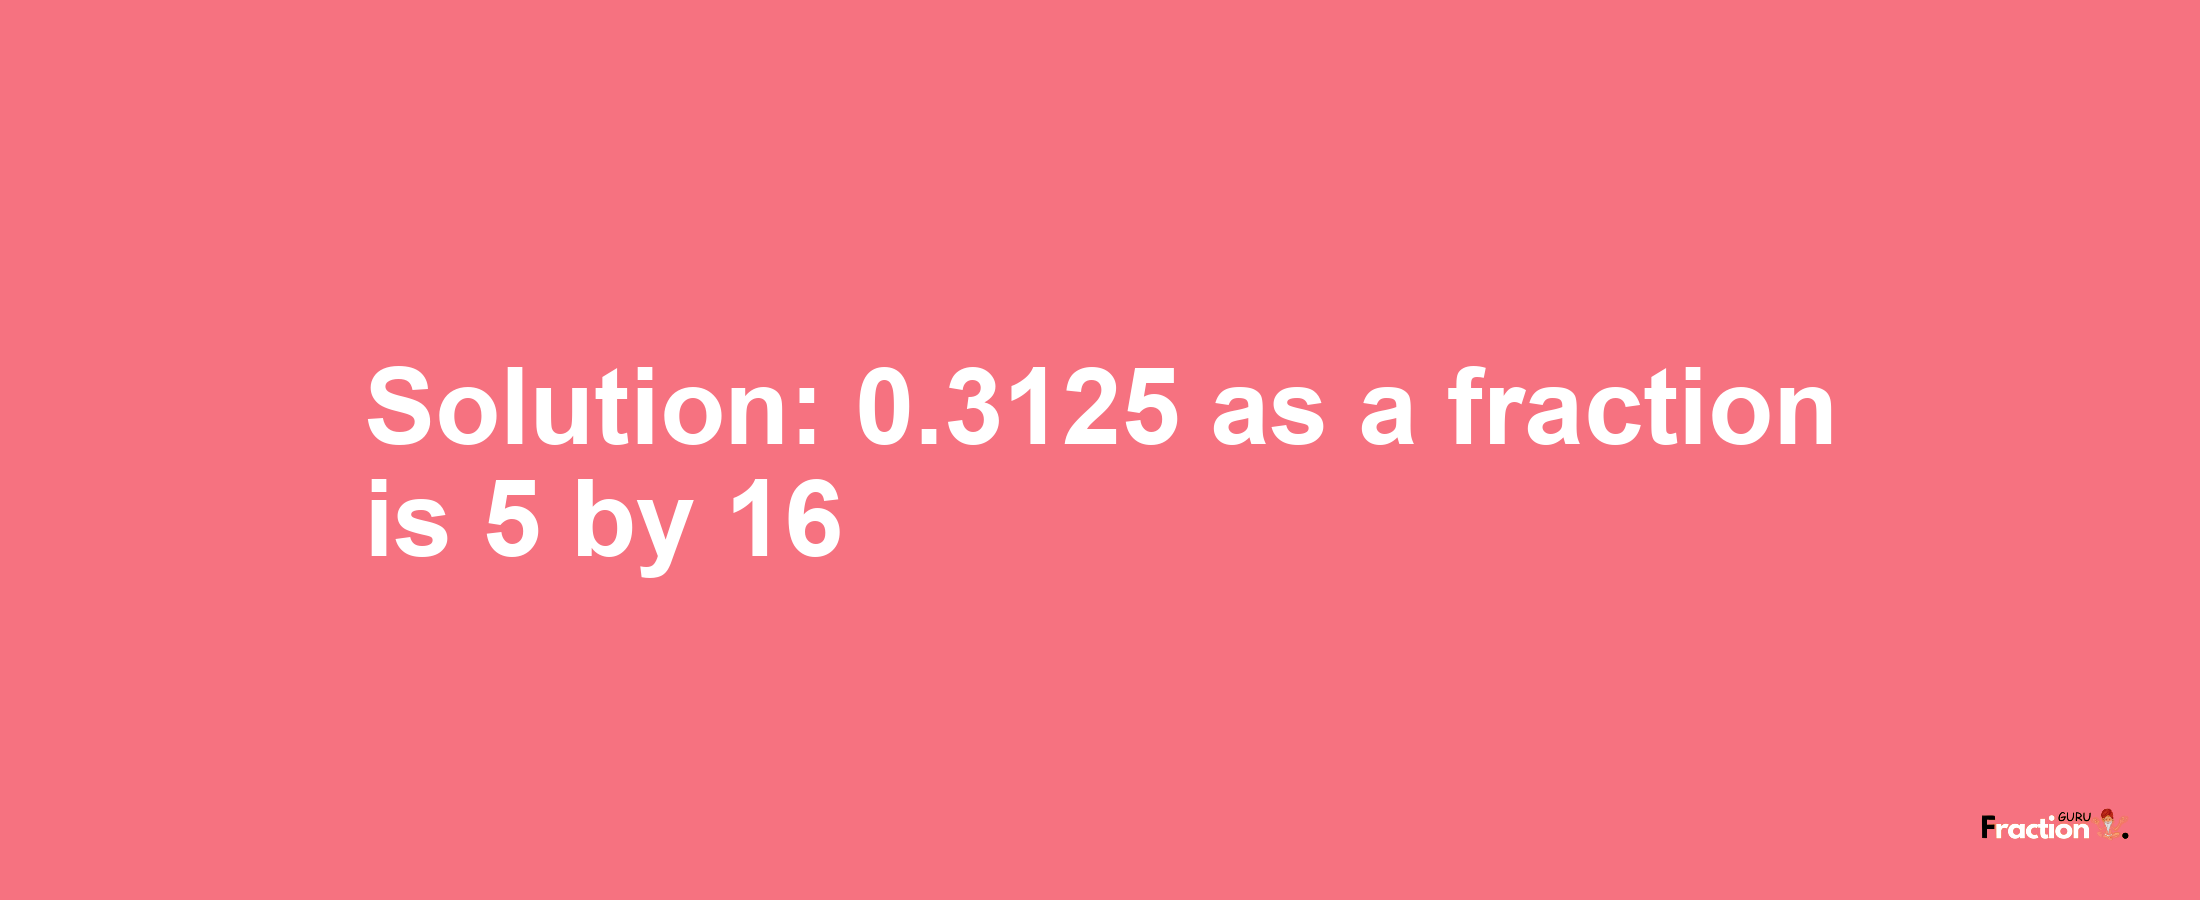 Solution:0.3125 as a fraction is 5/16